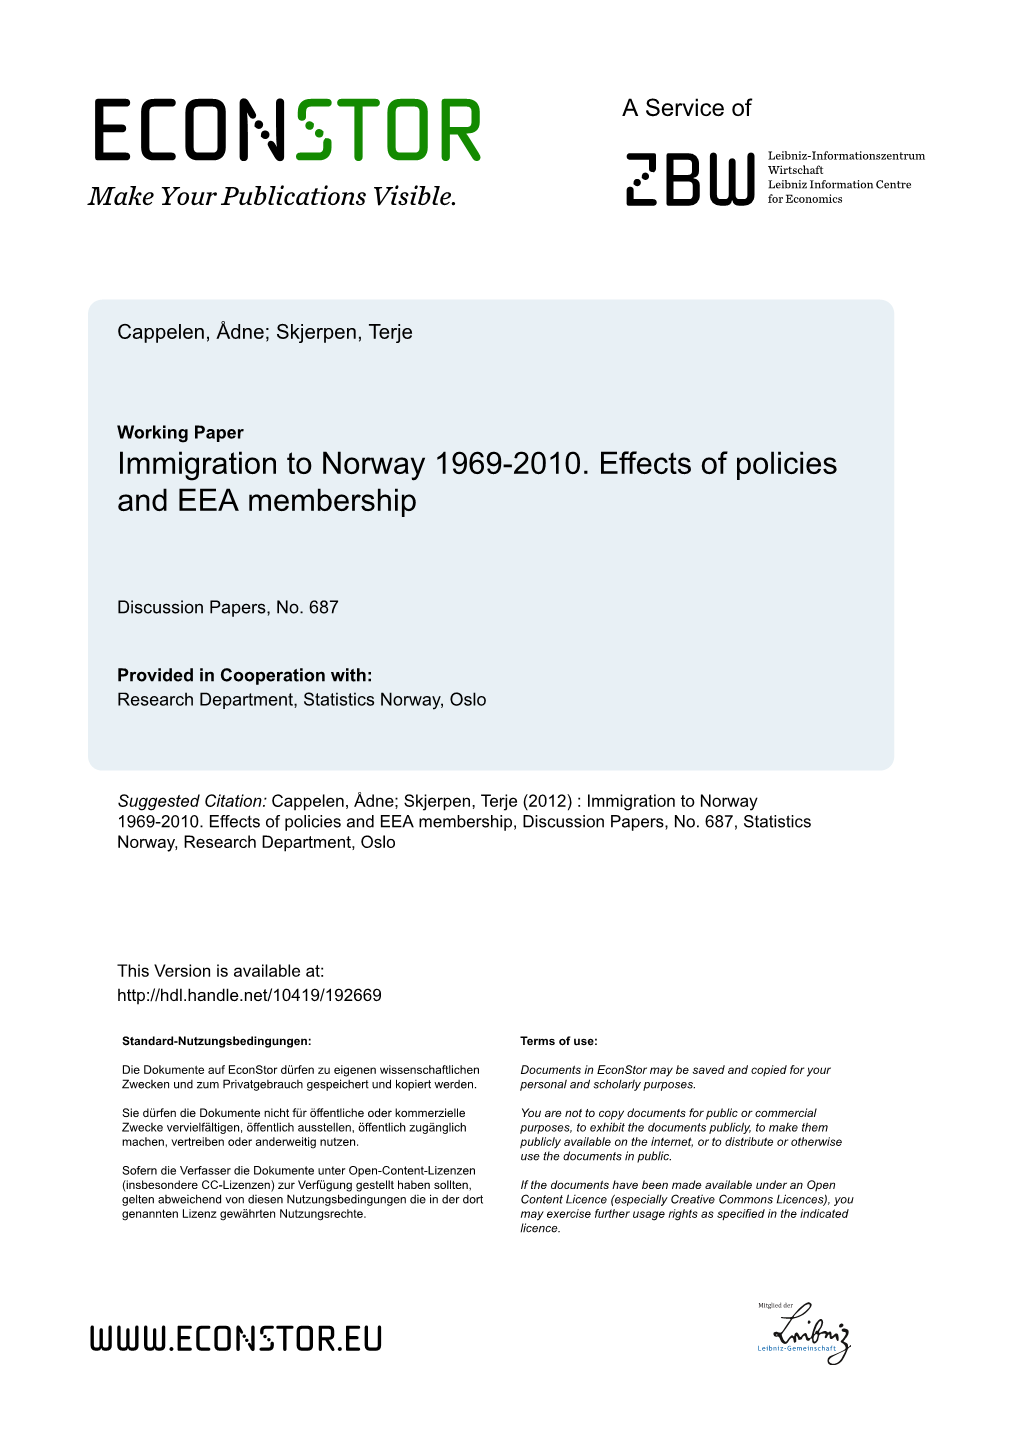 Immigration to Norway 1969-2010. Effects of Policies and EEA Membership